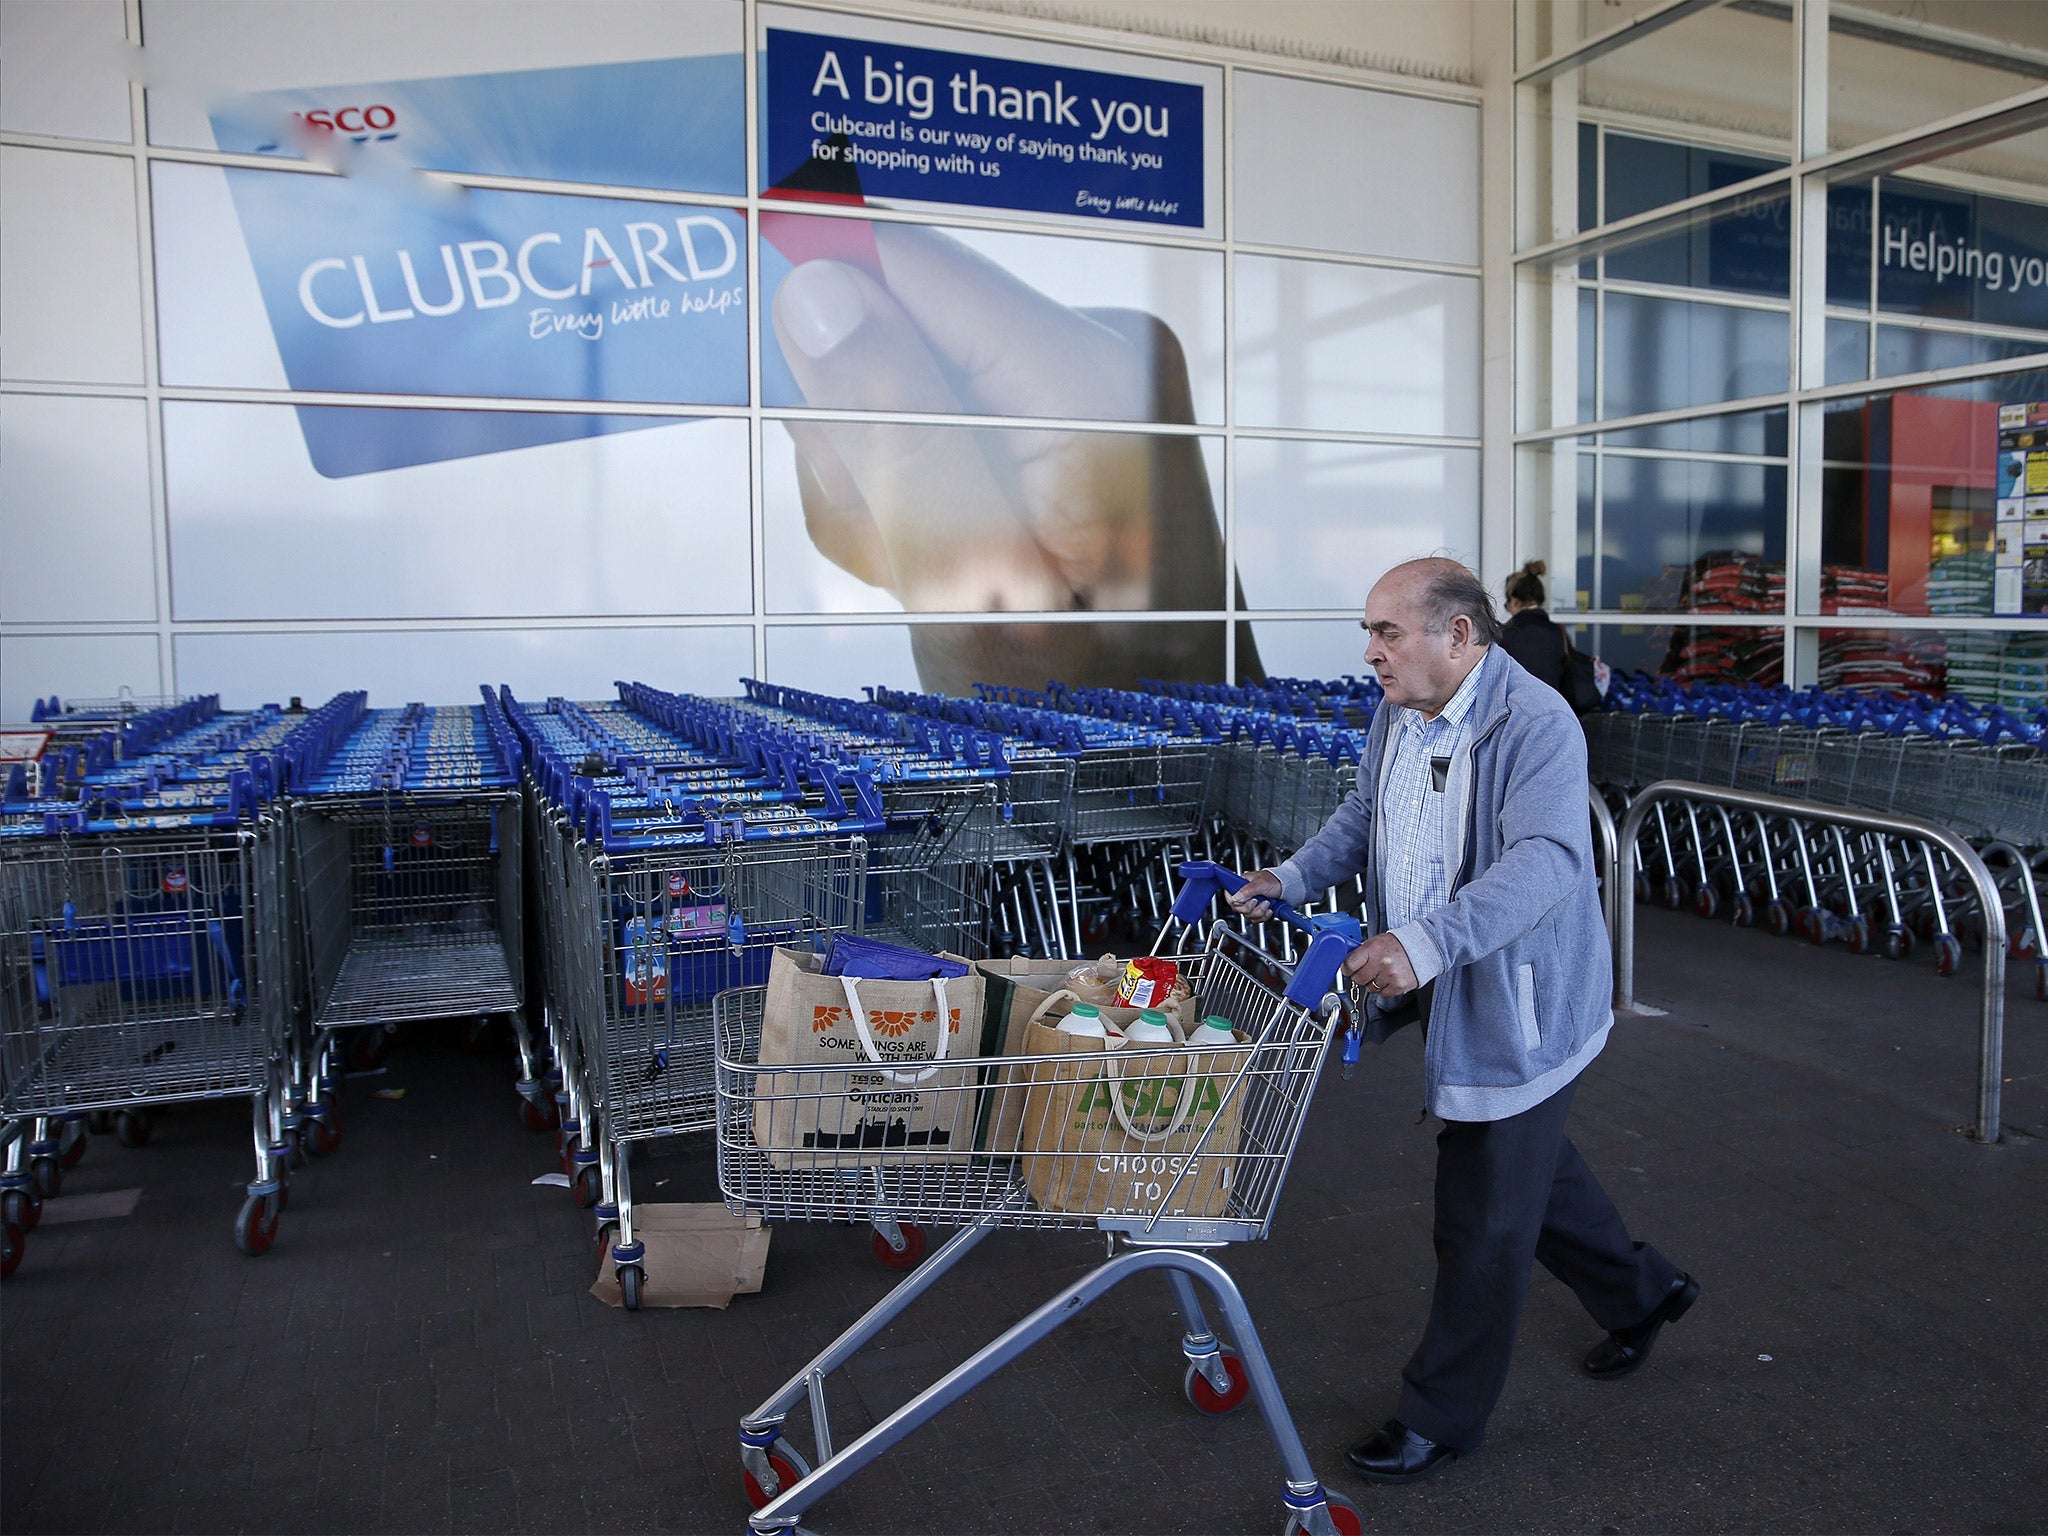 A man shops at a Tesco supermarket in Sunbury-on-Thames in Surrey